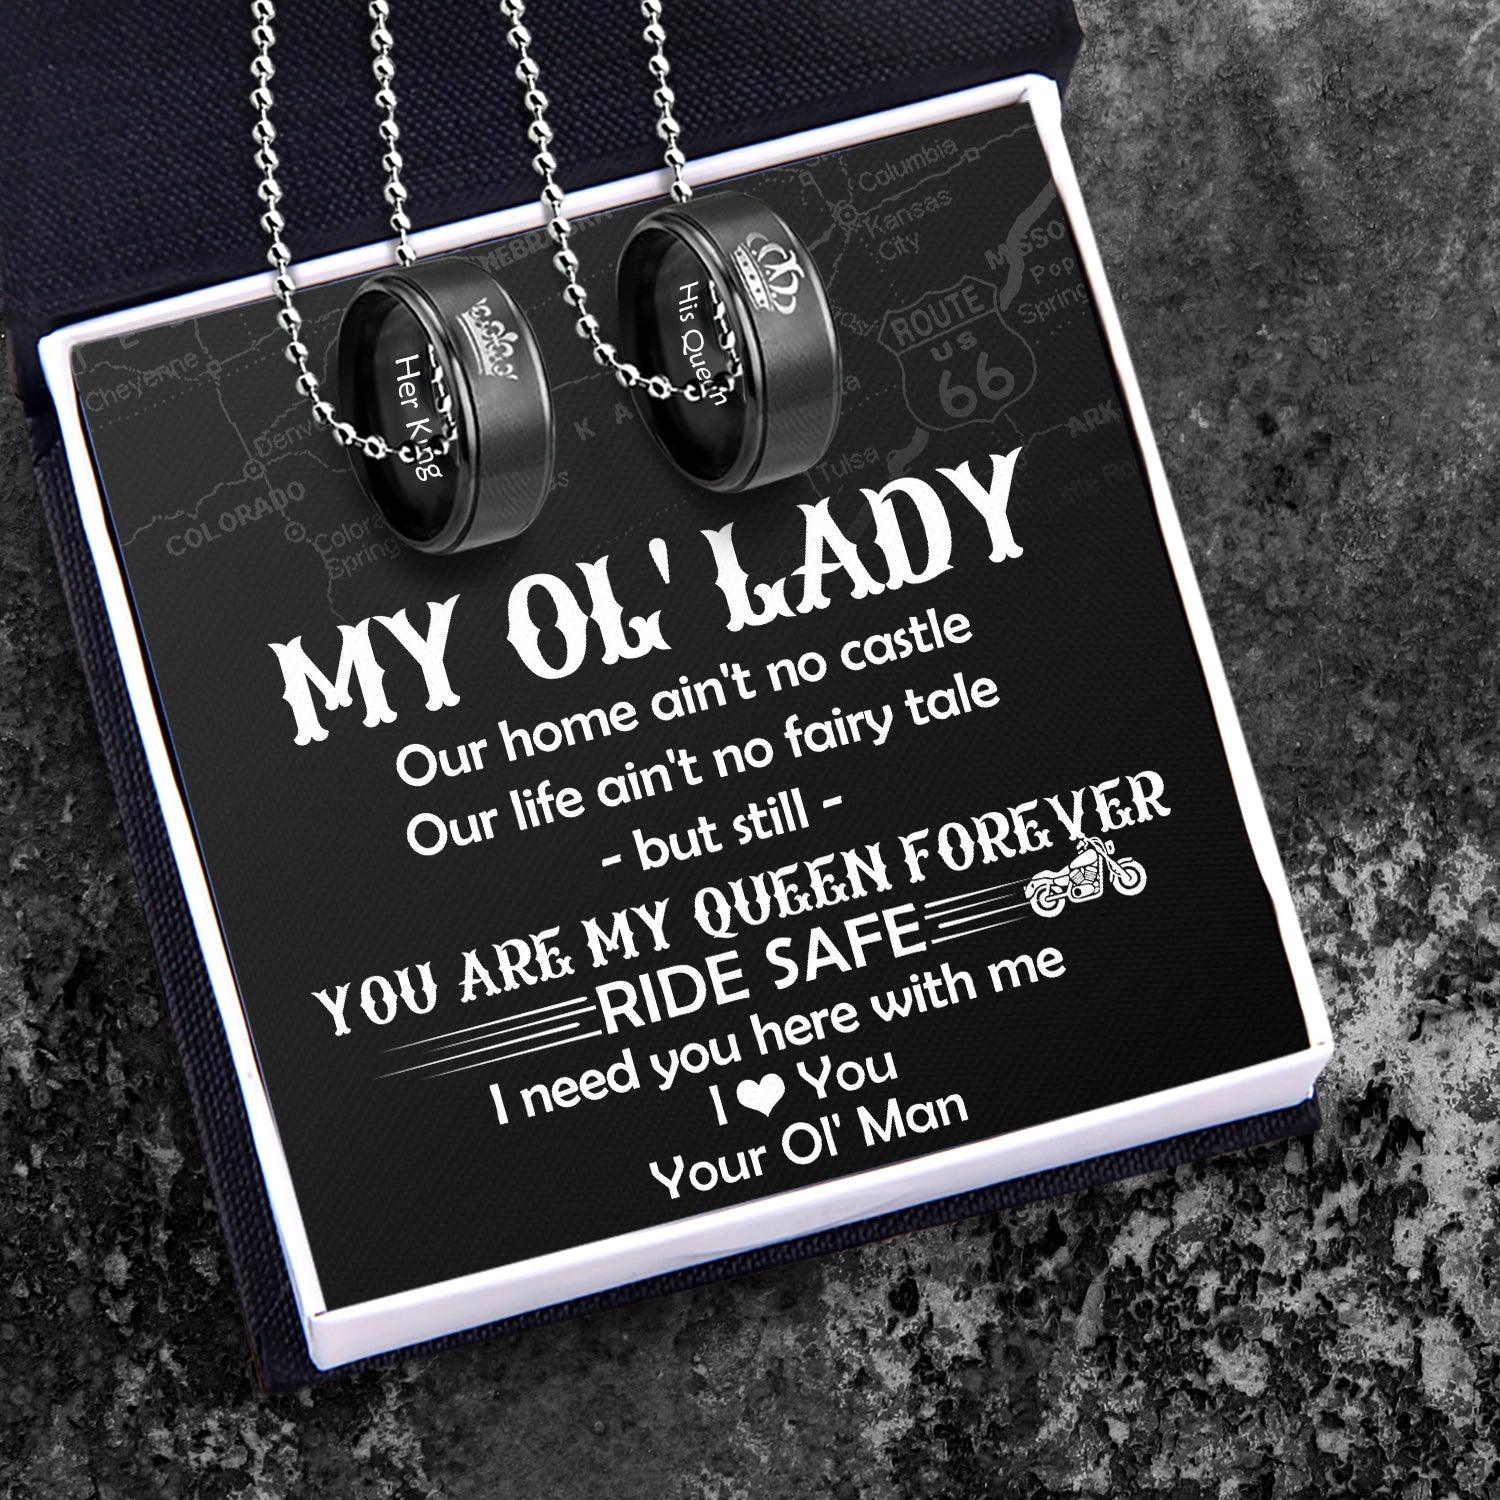 Couple Pendant Necklaces - Biker - To My Ol' Lady - You Are My Queen Forever - Augnw13004 - Gifts Holder